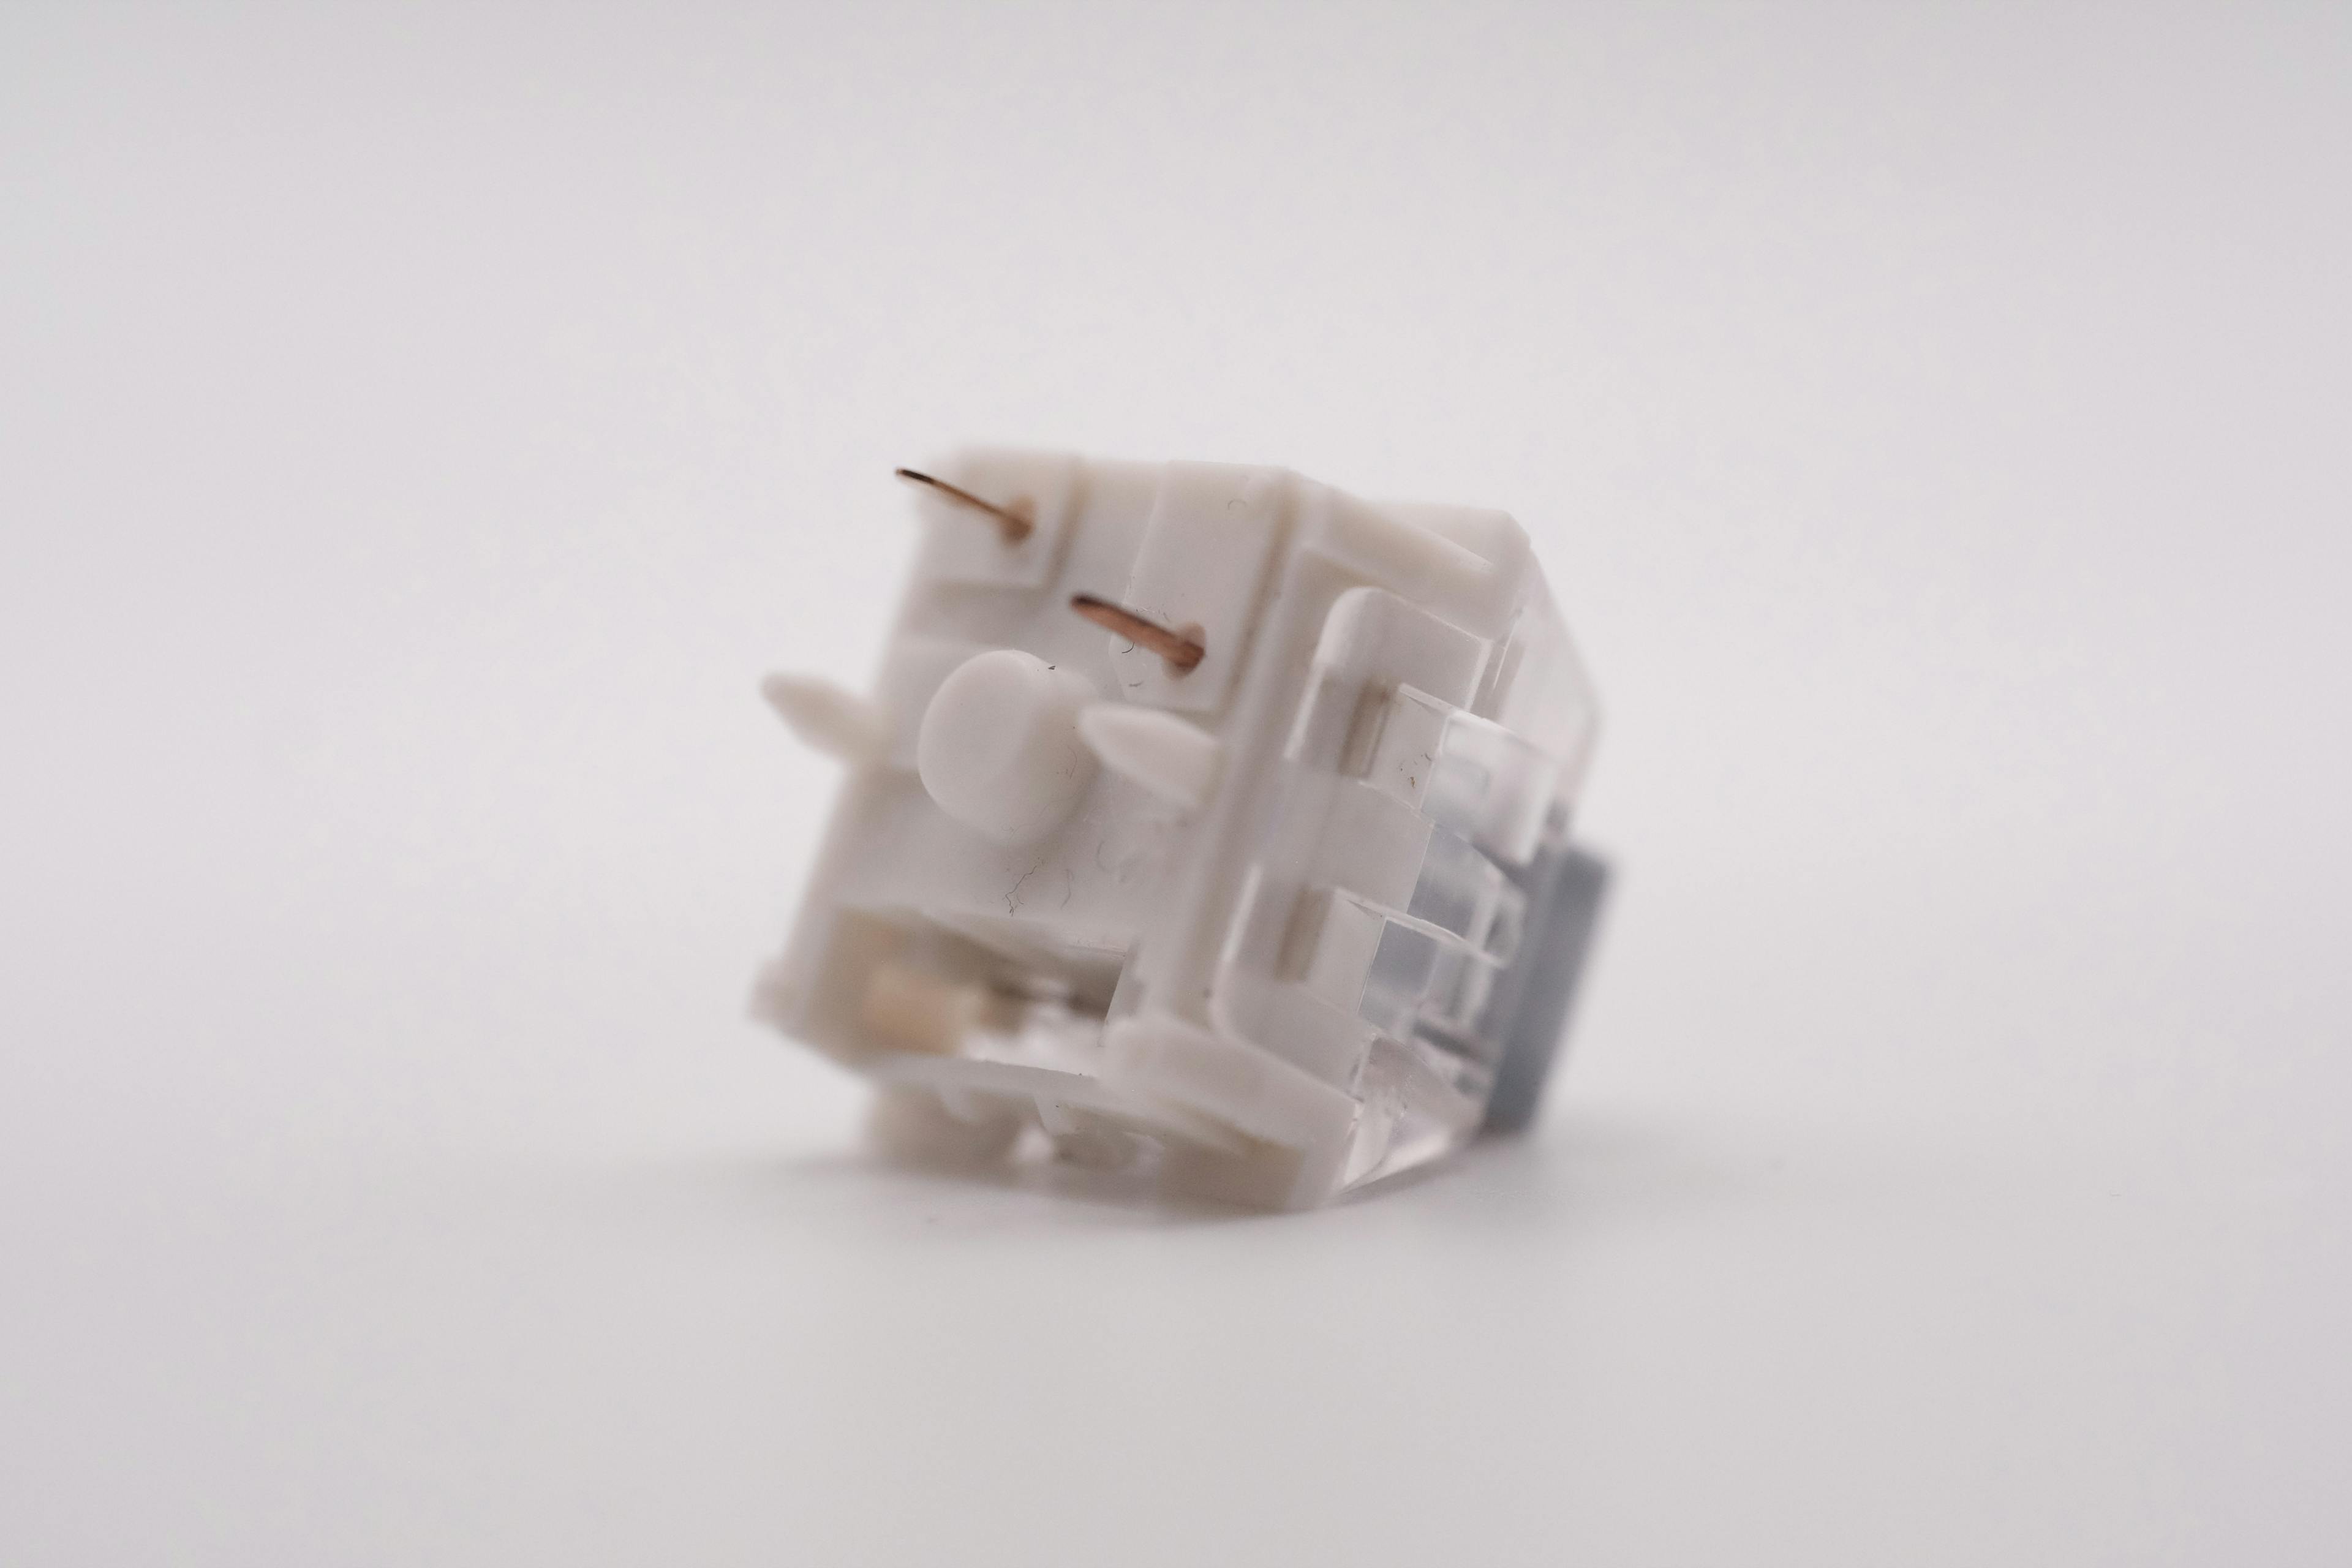 Kailh Box Mute Jade Clicky Switches